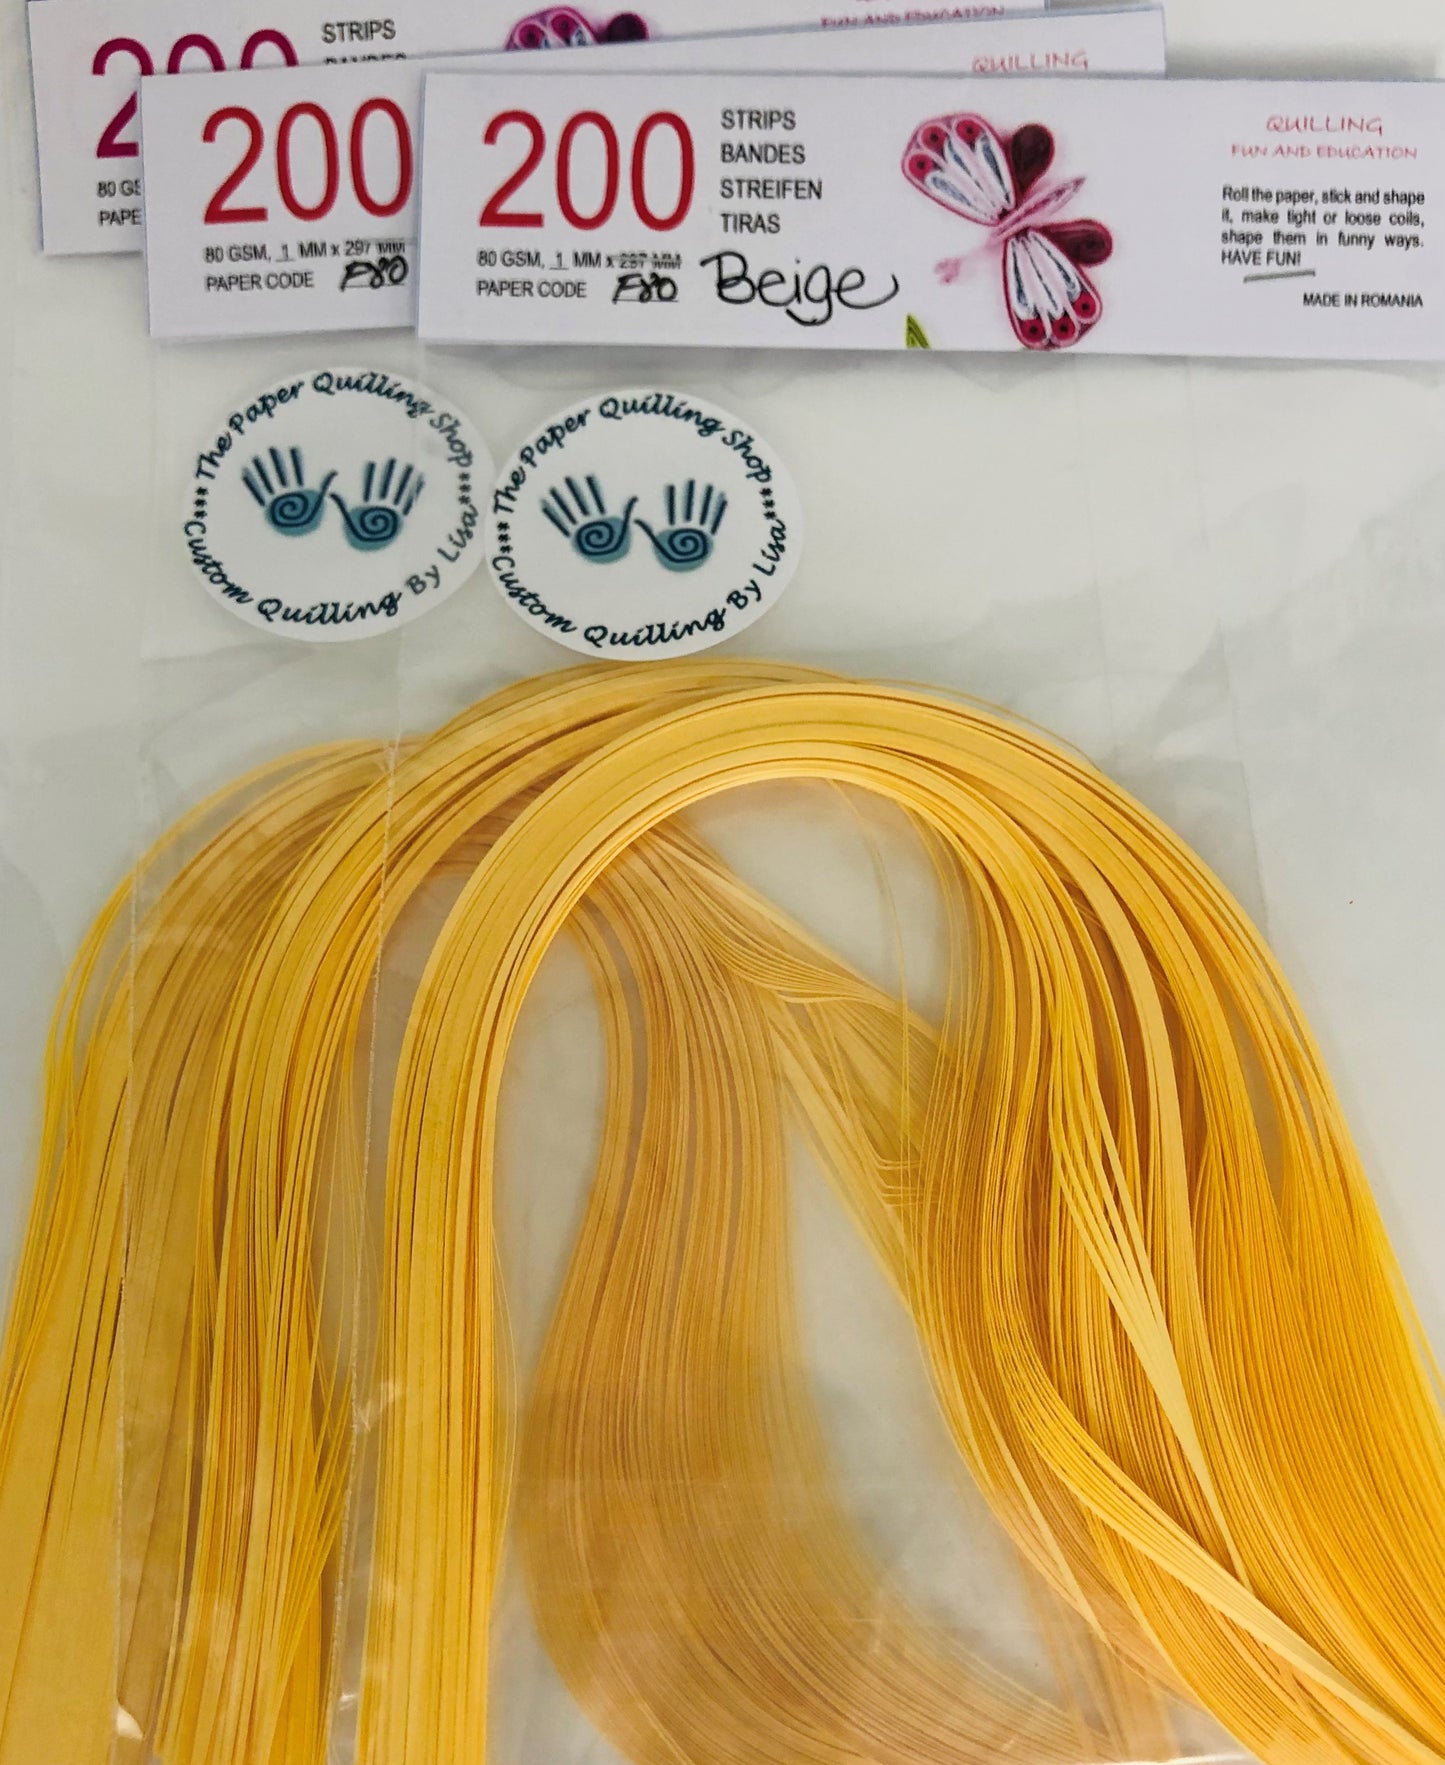 80gsm 1mm Paper Quilling Strips - 200 strips per package